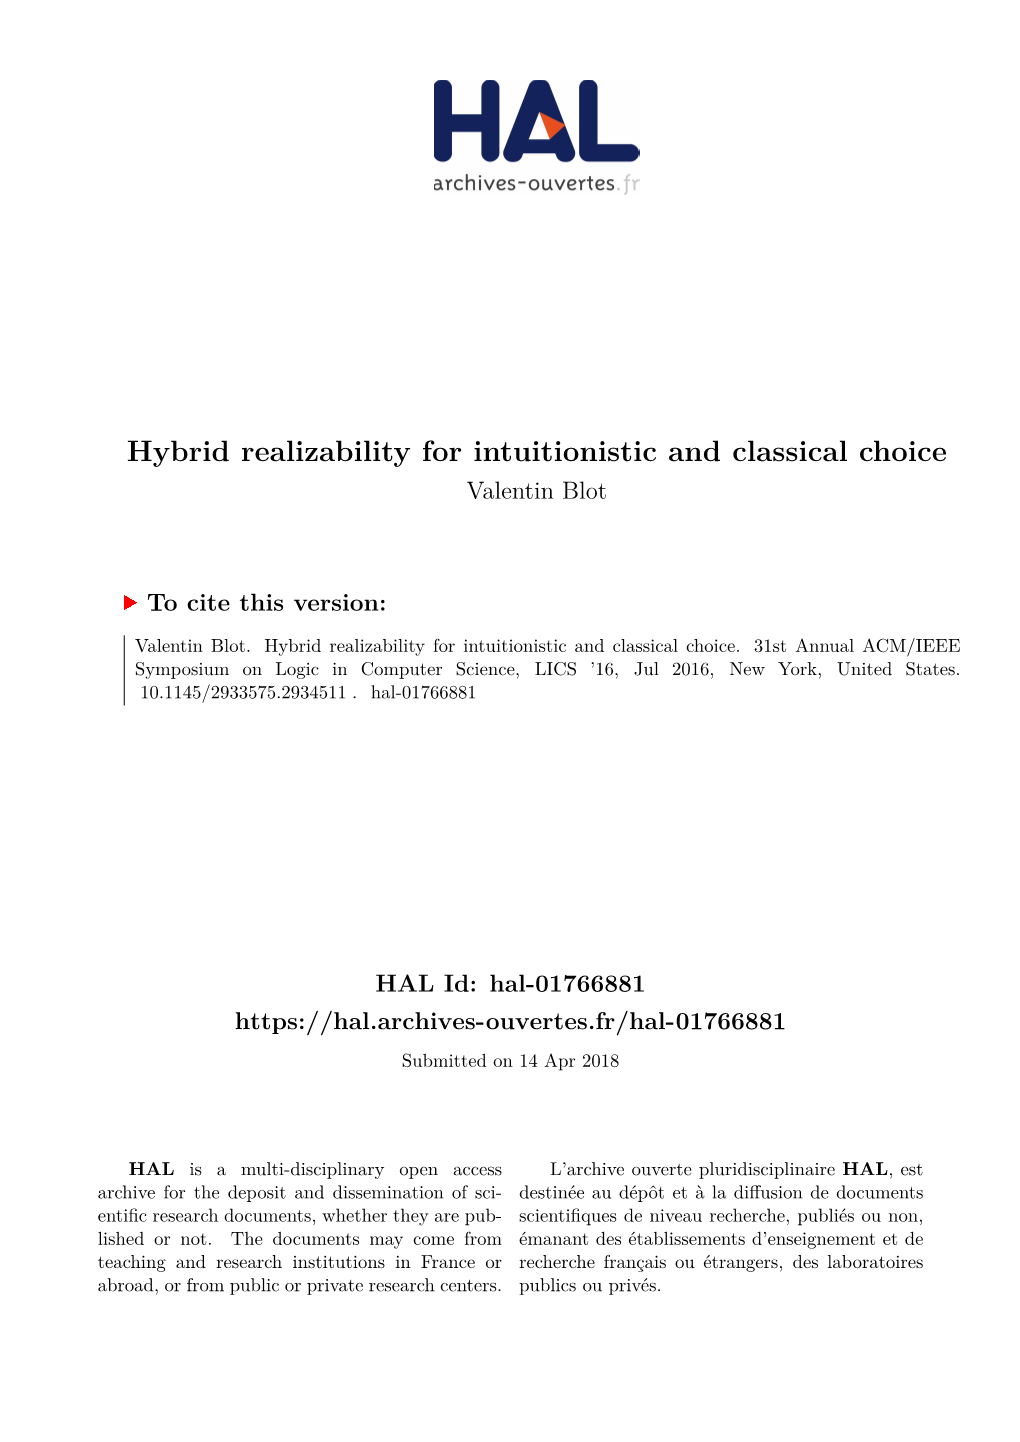 Hybrid Realizability for Intuitionistic and Classical Choice Valentin Blot